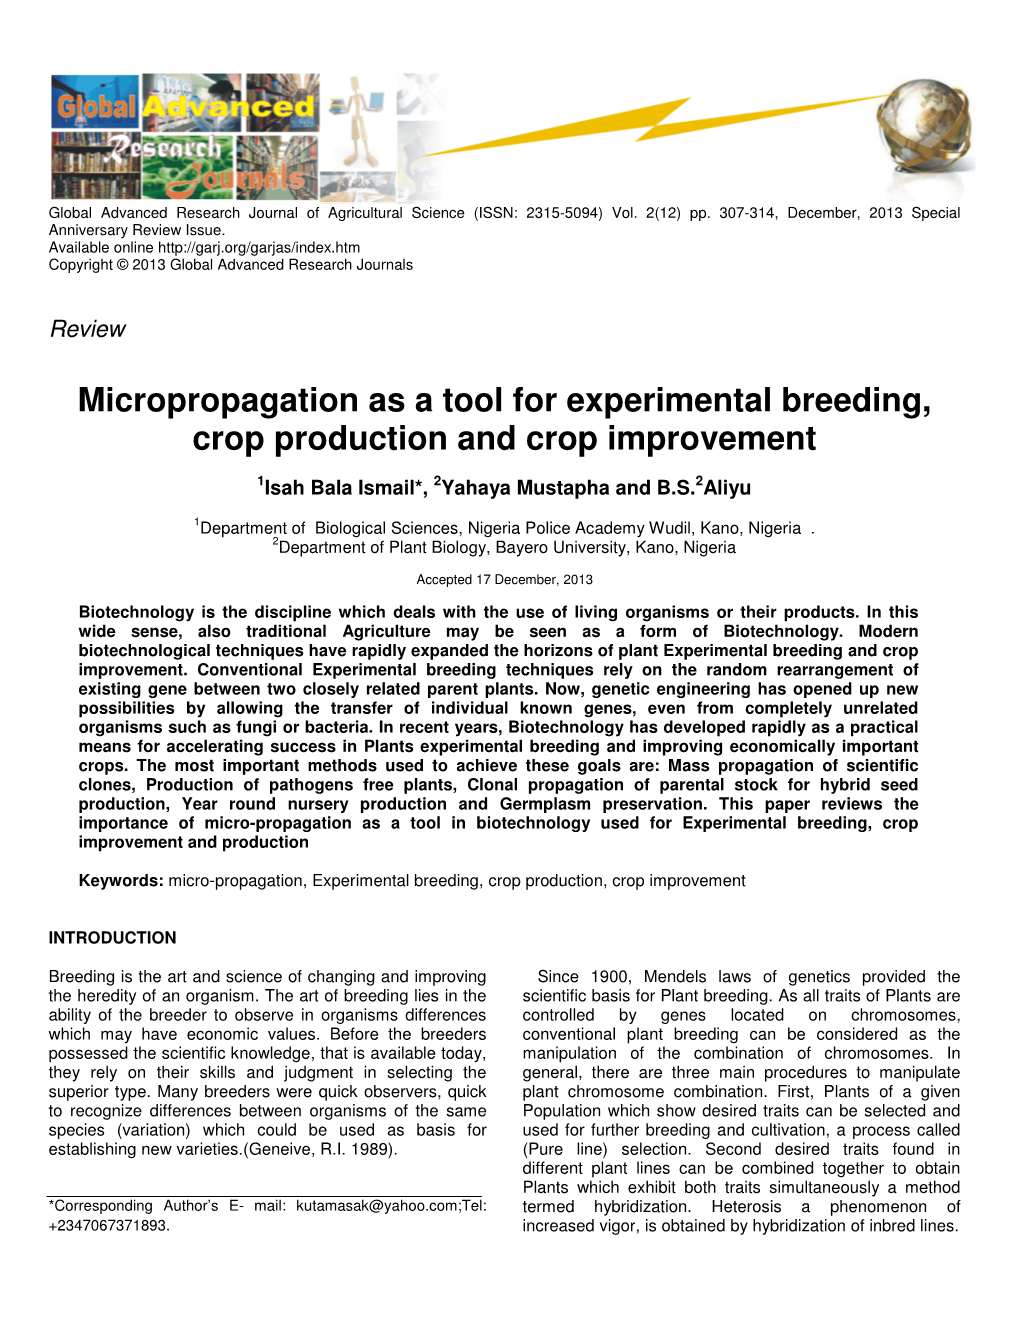 Micropropagation As a Tool for Experimental Breeding, Crop Production and Crop Improvement